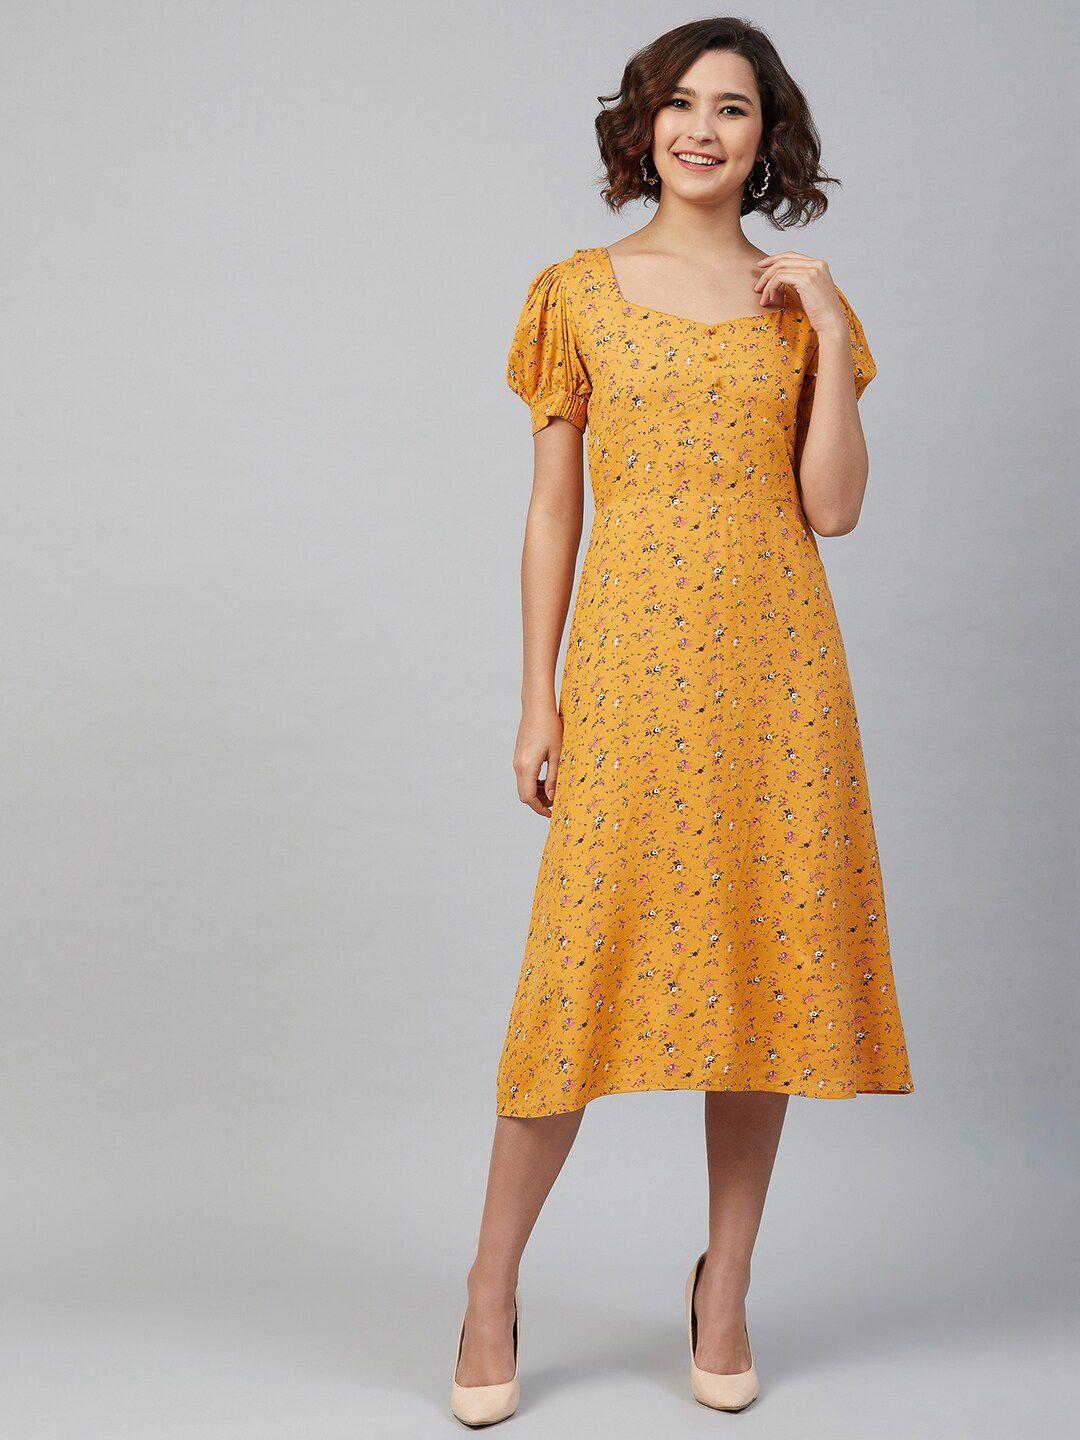 marie claire mustard yellow floral print puff sleeve a-line midi dress